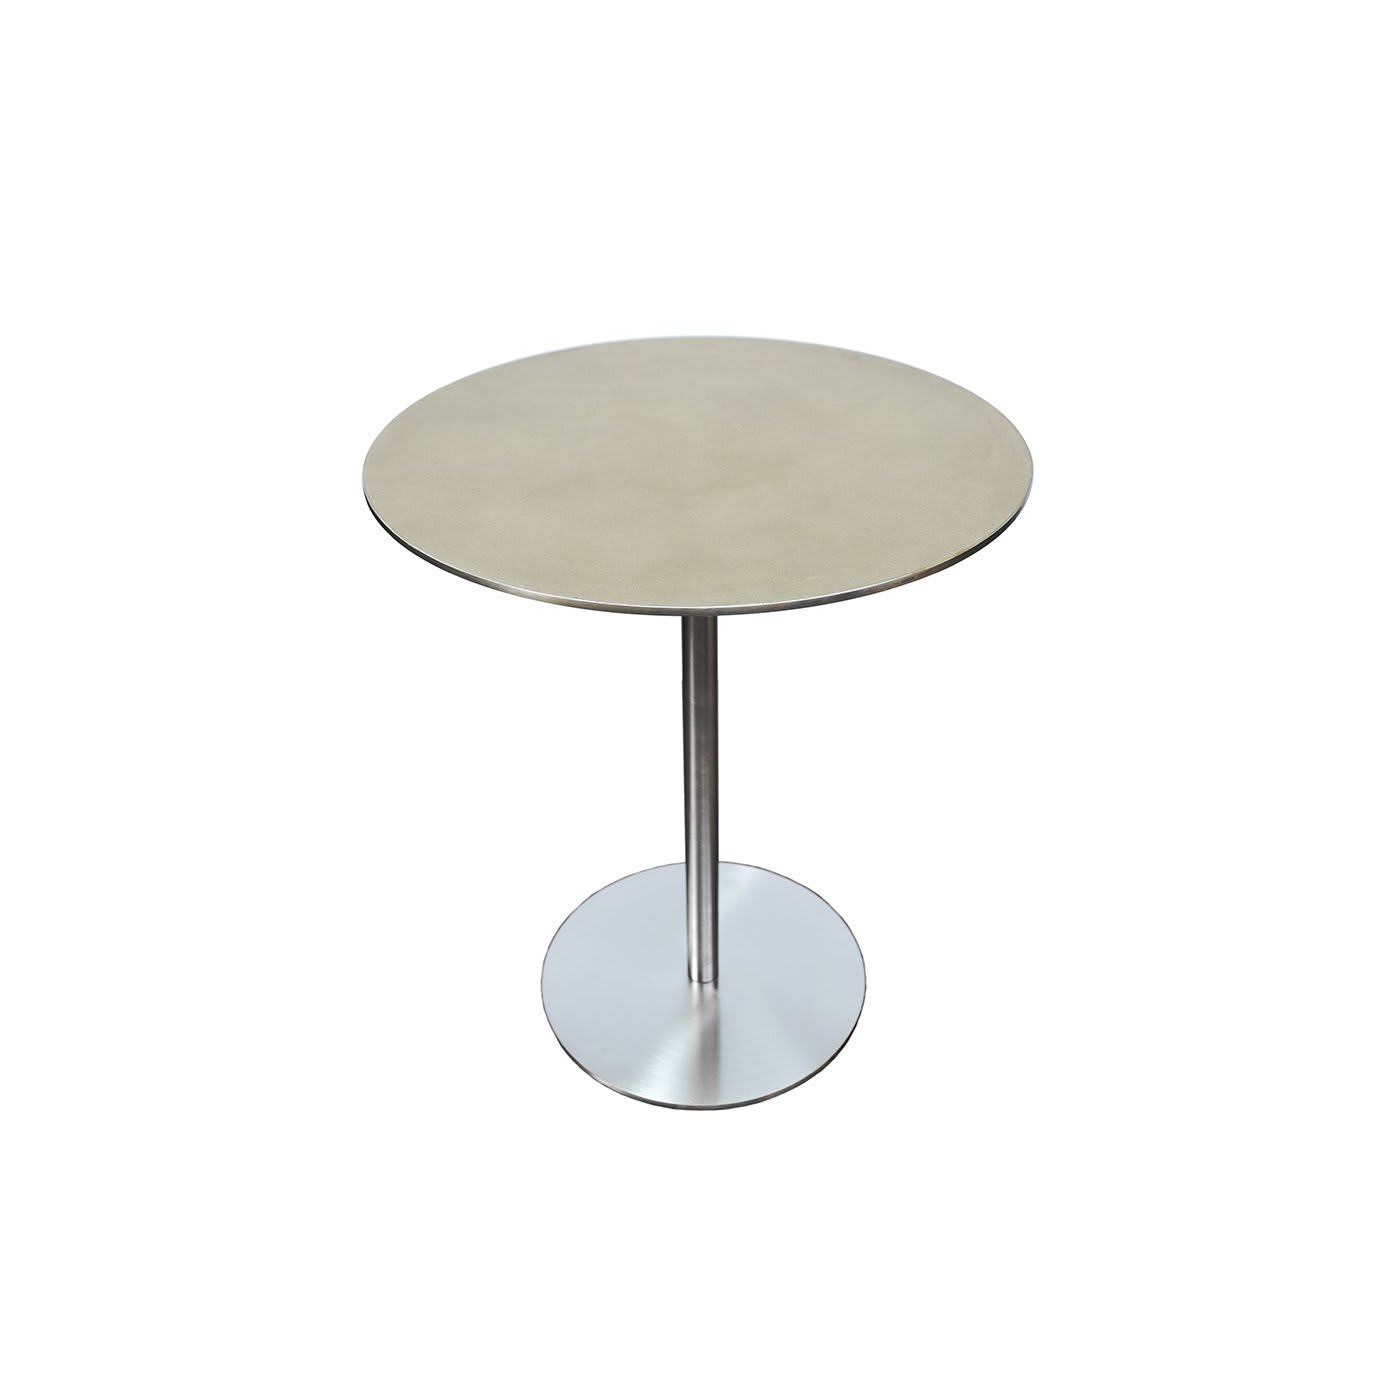 Ester Side Table in Stainless Steel and Powdered Clay - Mg12 by Monica Geronimi